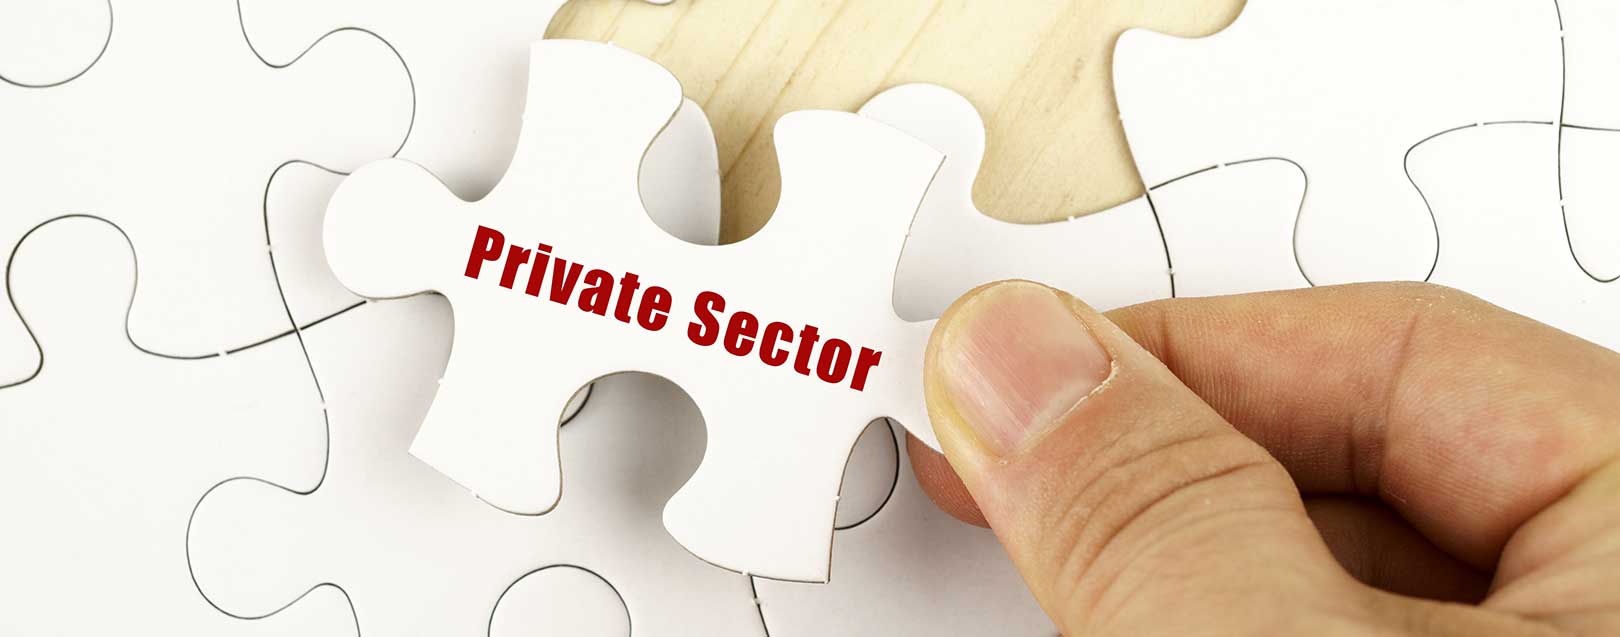 India’s pvt sector activity growth eases in April